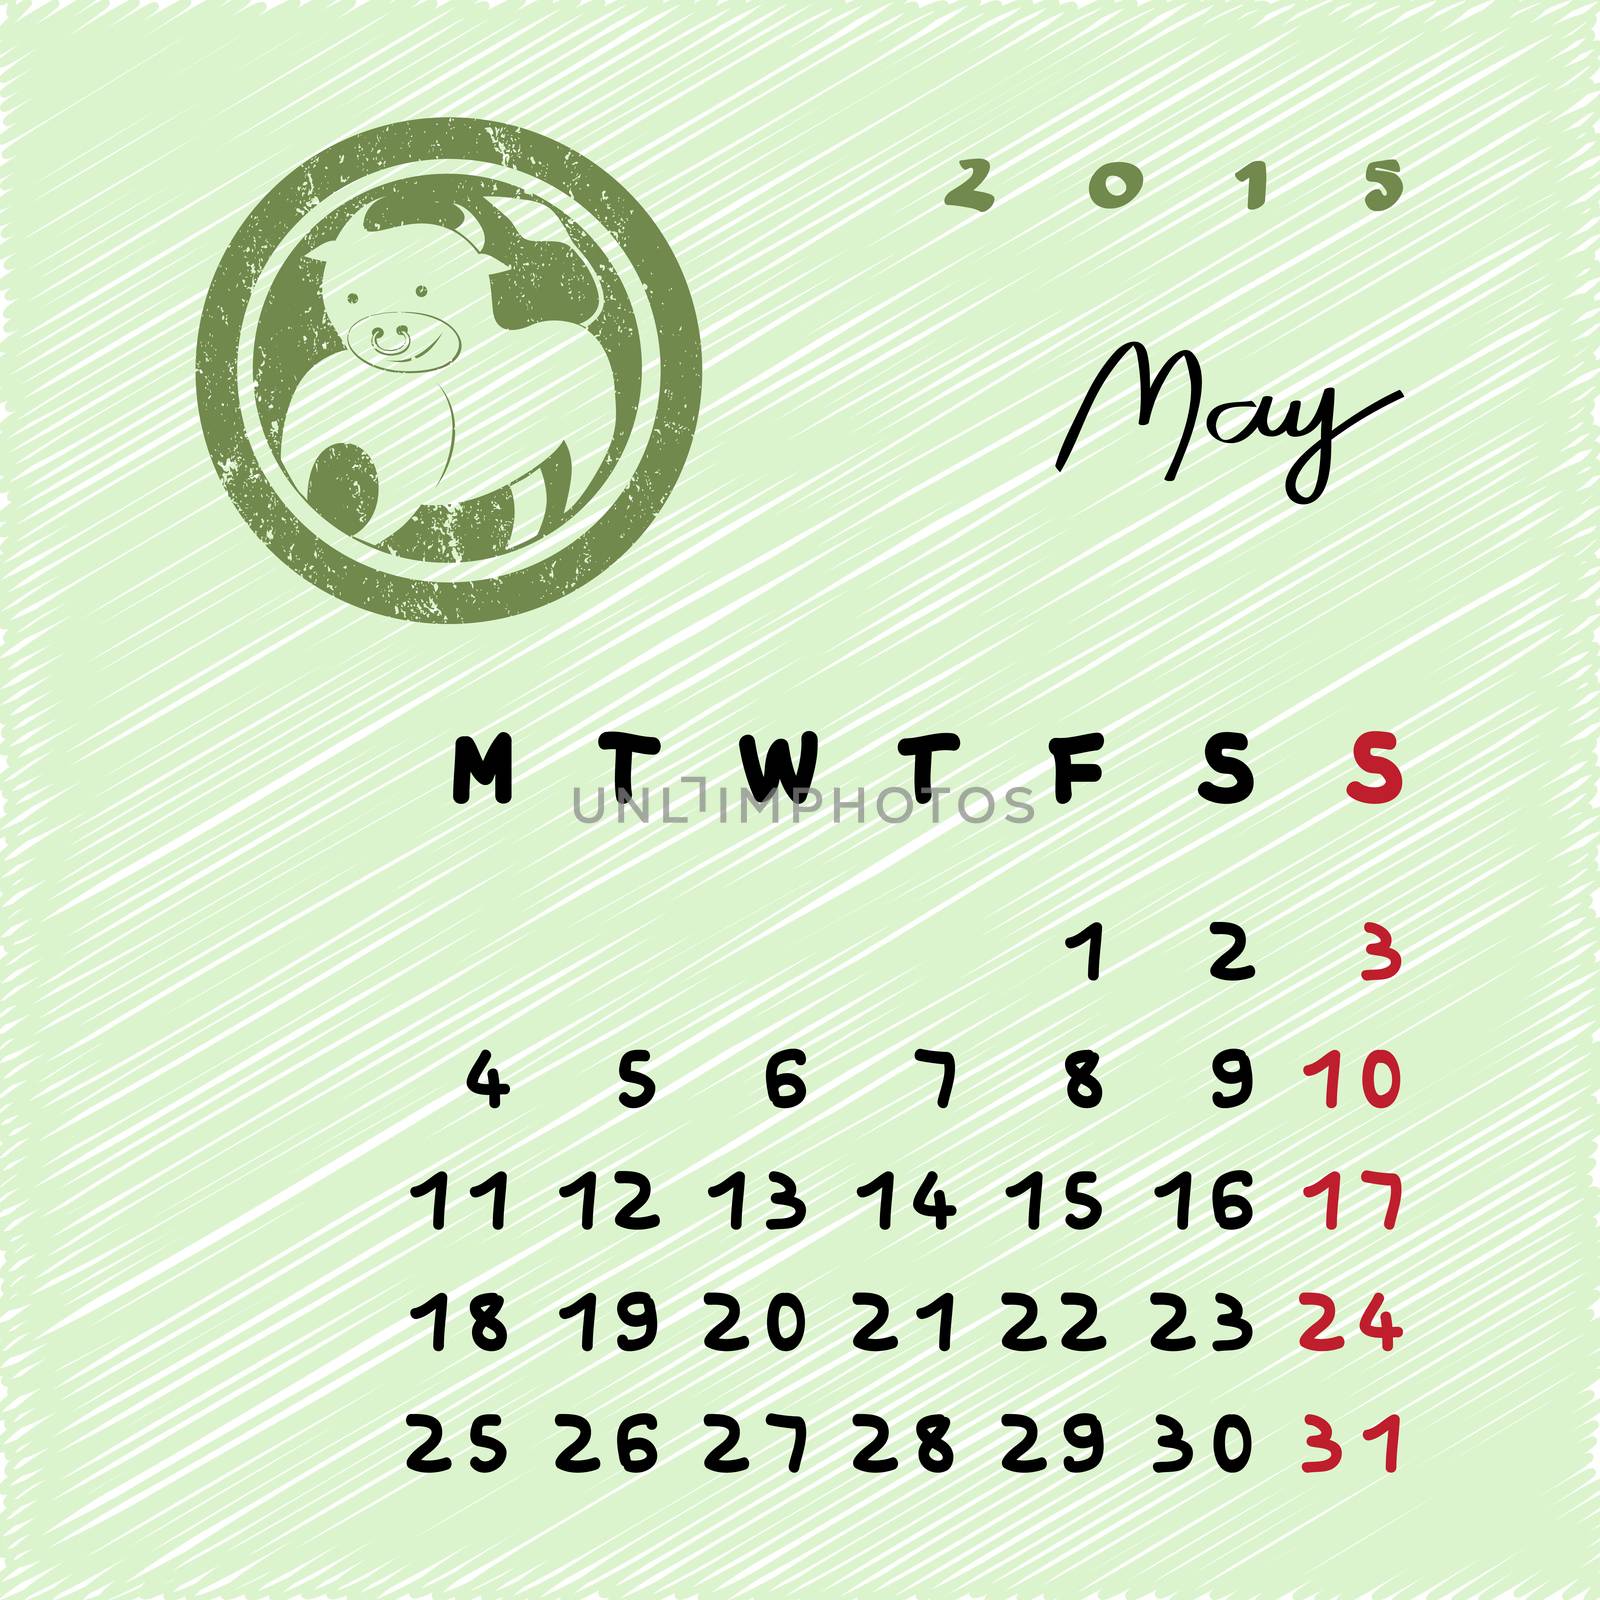 Calendar 2015 page illustration with zodiac sign of Taurus as grungy stamp over a colored scribble background, may